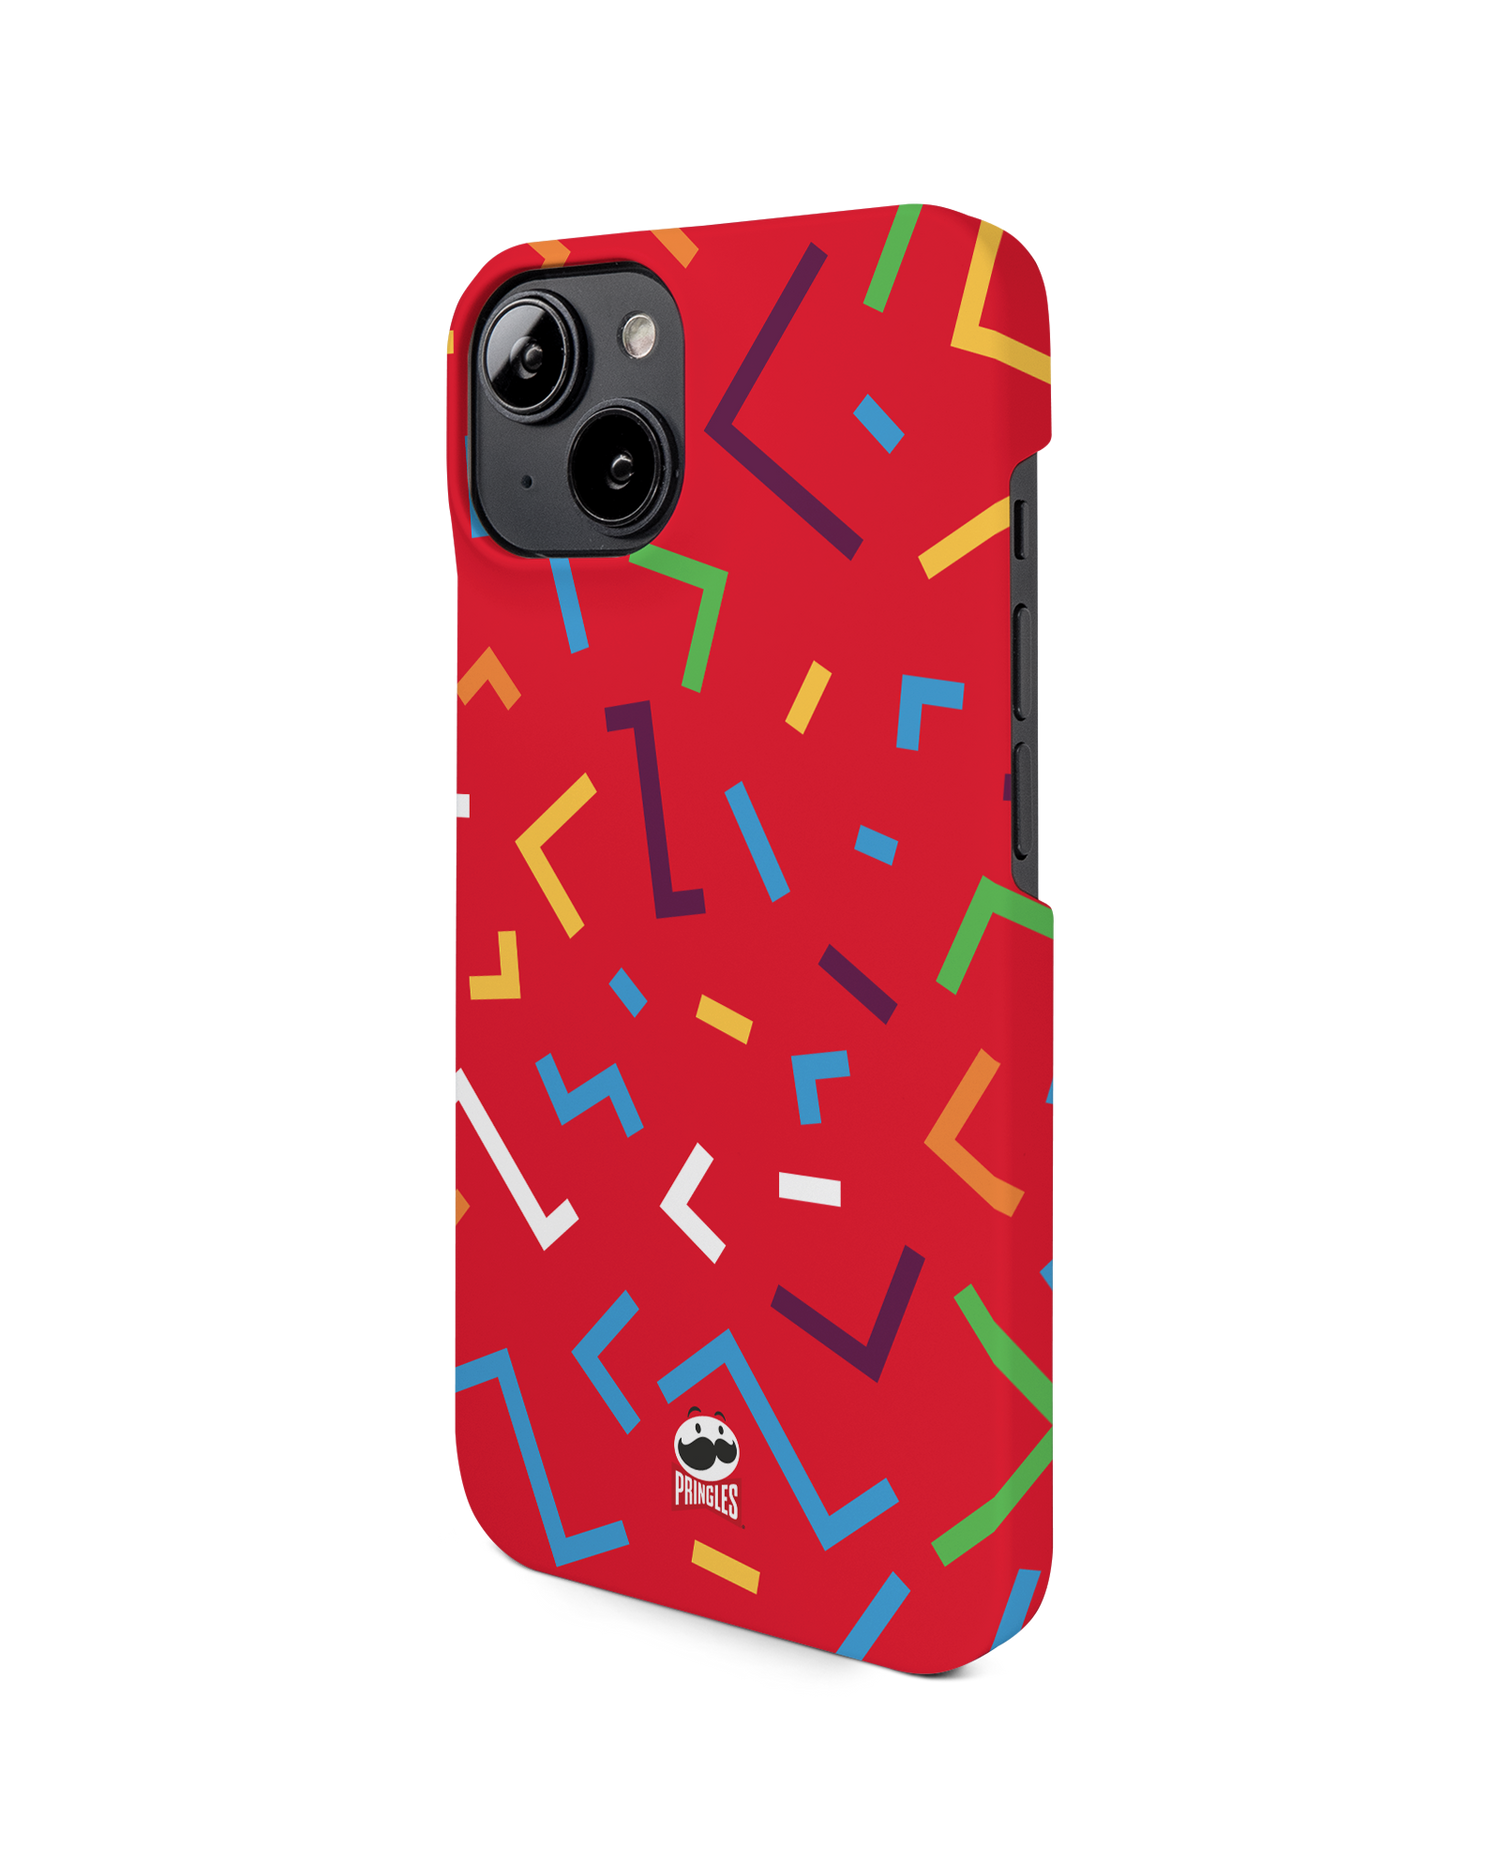 Pringles Confetti Hard Shell Phone Case for Apple iPhone 14: View from the right side